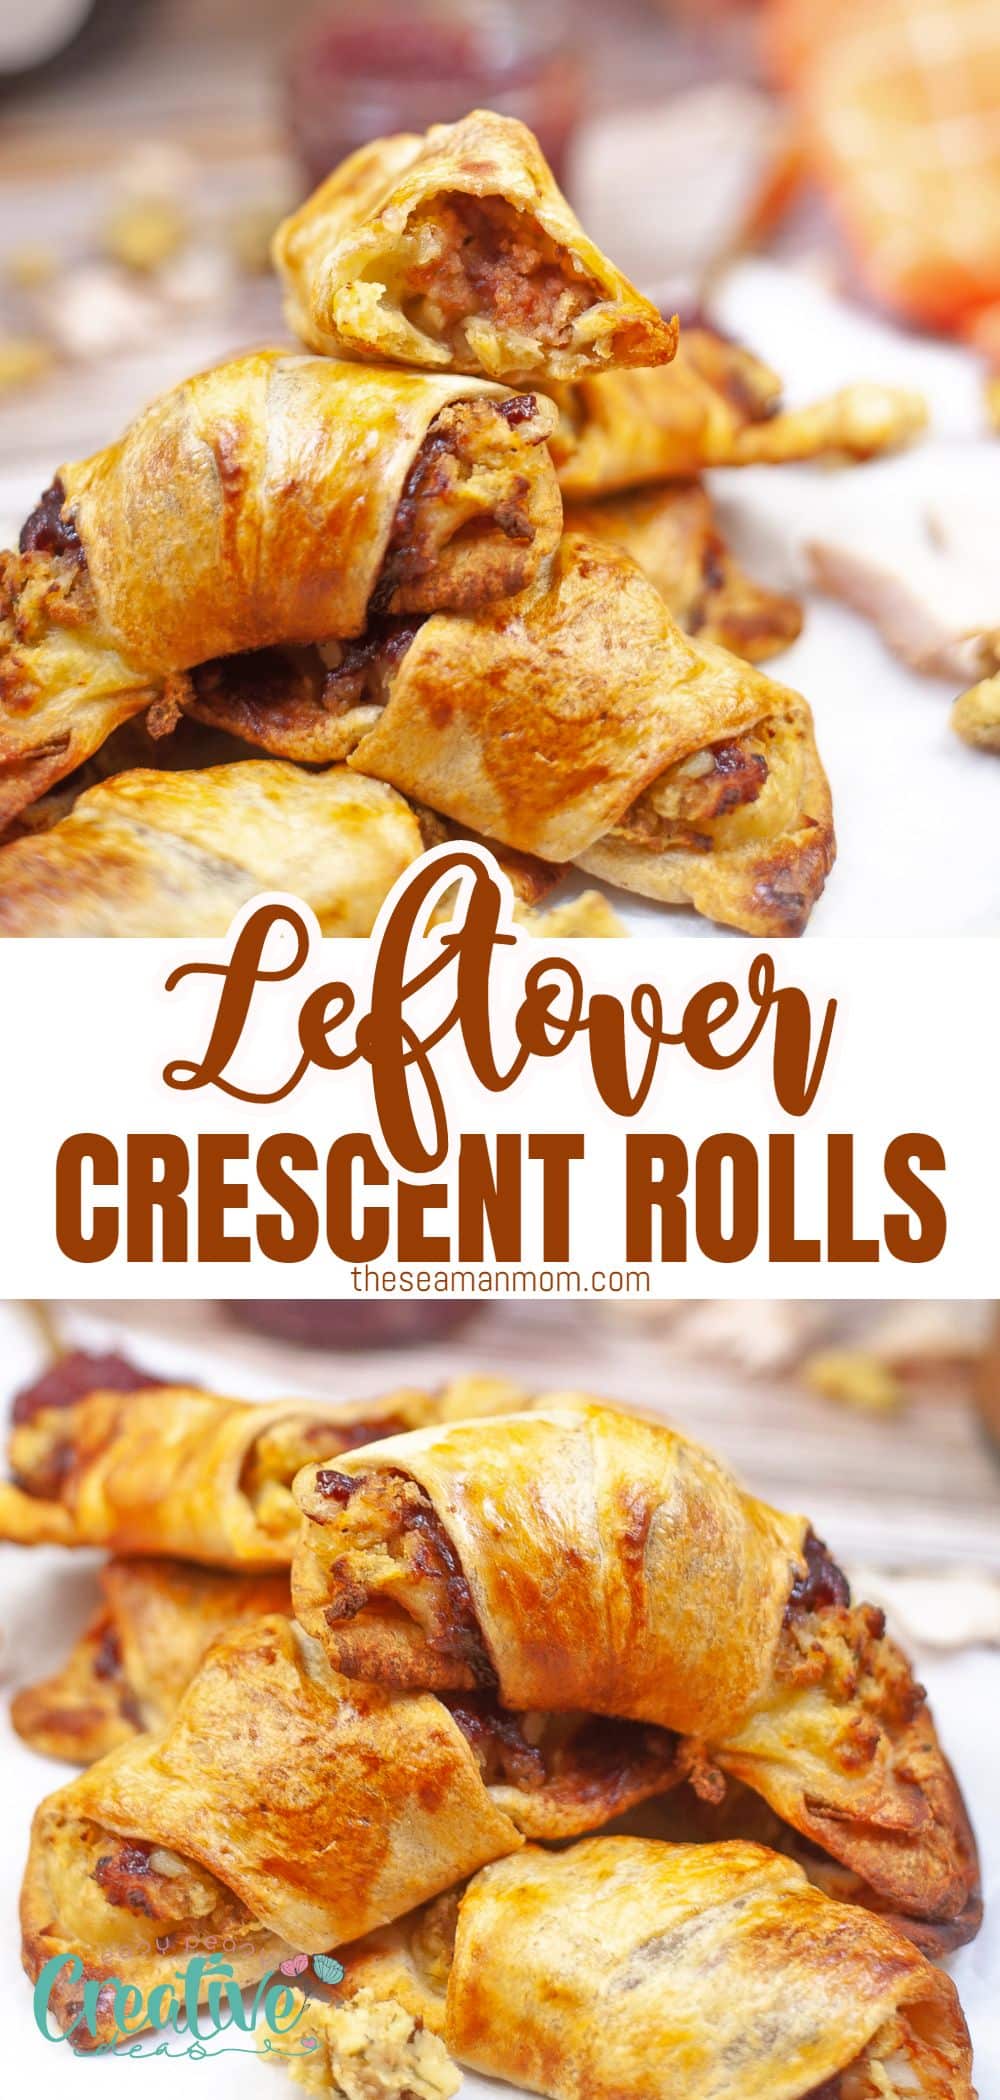 Looking for something to do with all those Thanksgiving leftovers? Why not try your hand at making some delicious Thanksgiving leftover crescent rolls! This recipe is easy to follow and only takes a few minutes to prepare. So why not give it a try and enjoy your Thanksgiving leftovers in a new way! via @petroneagu